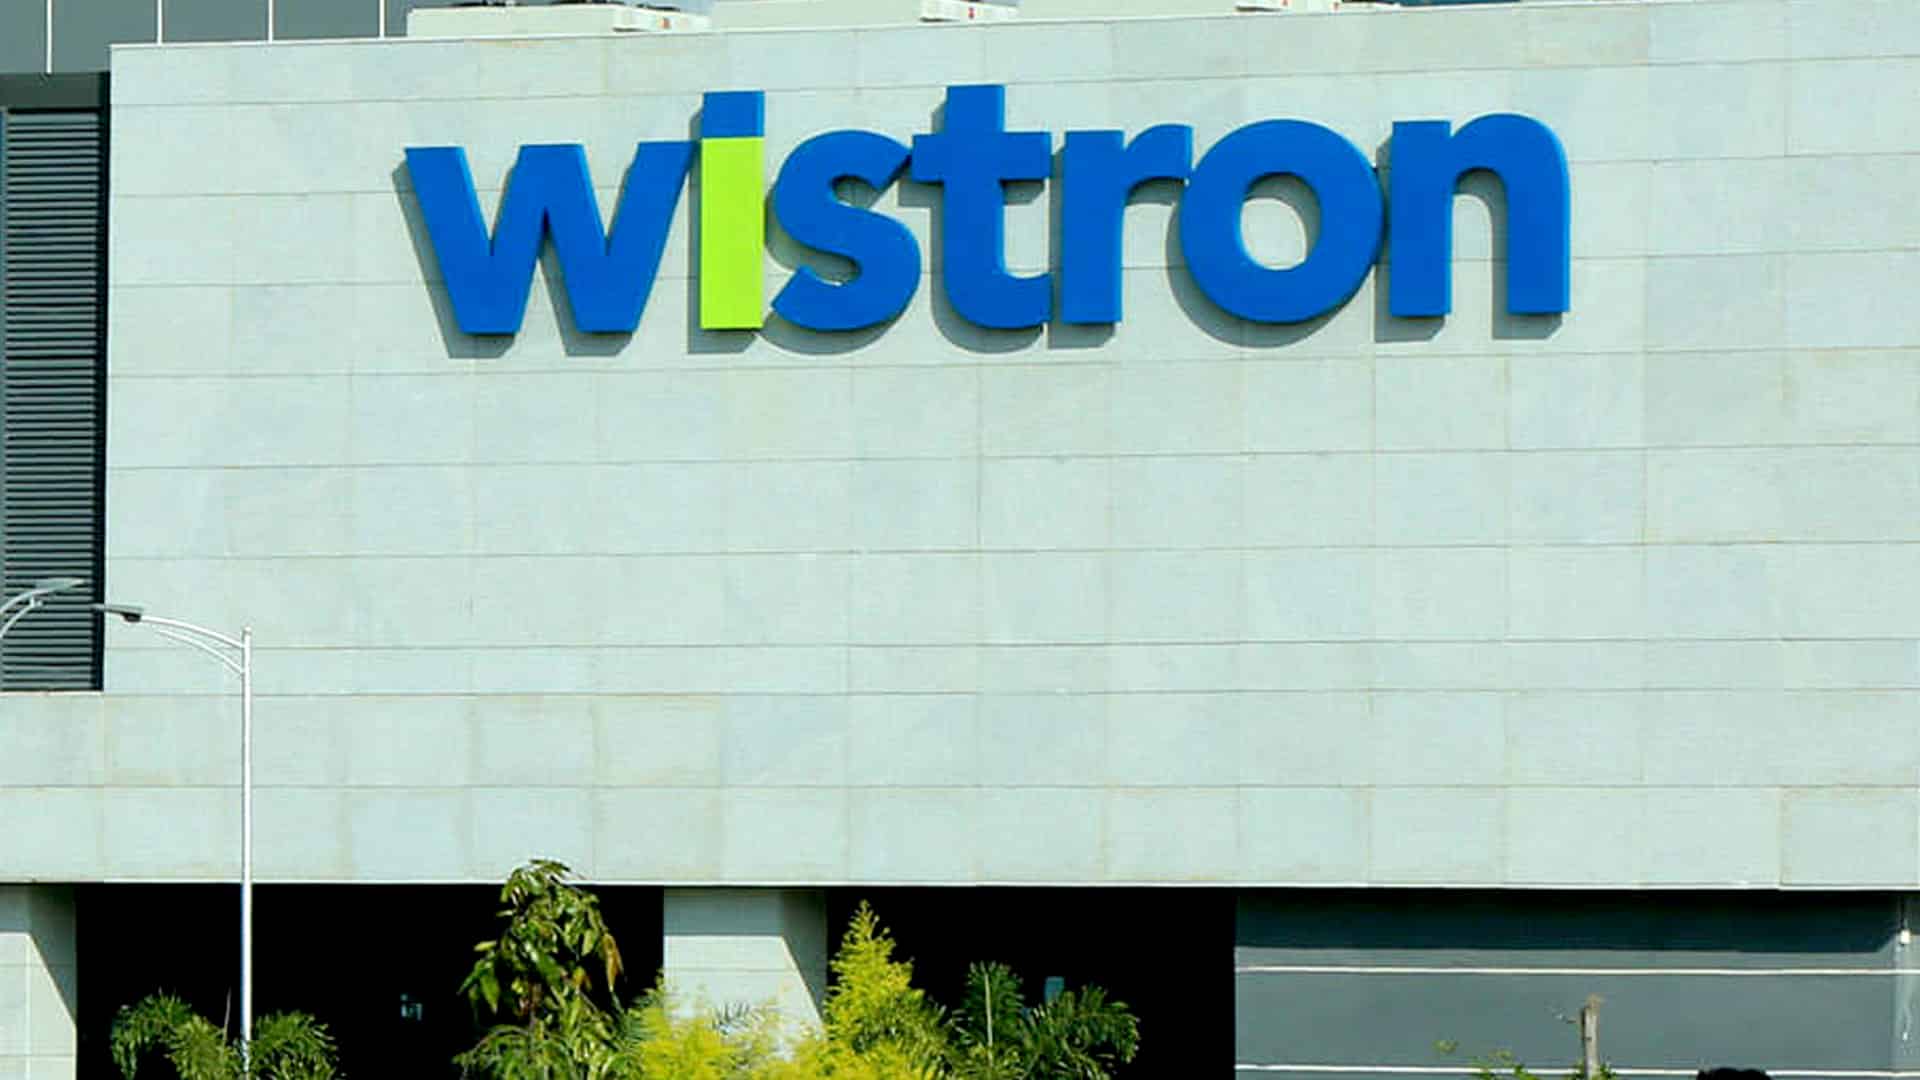 Wistron Corp placed on probation over wage lapses